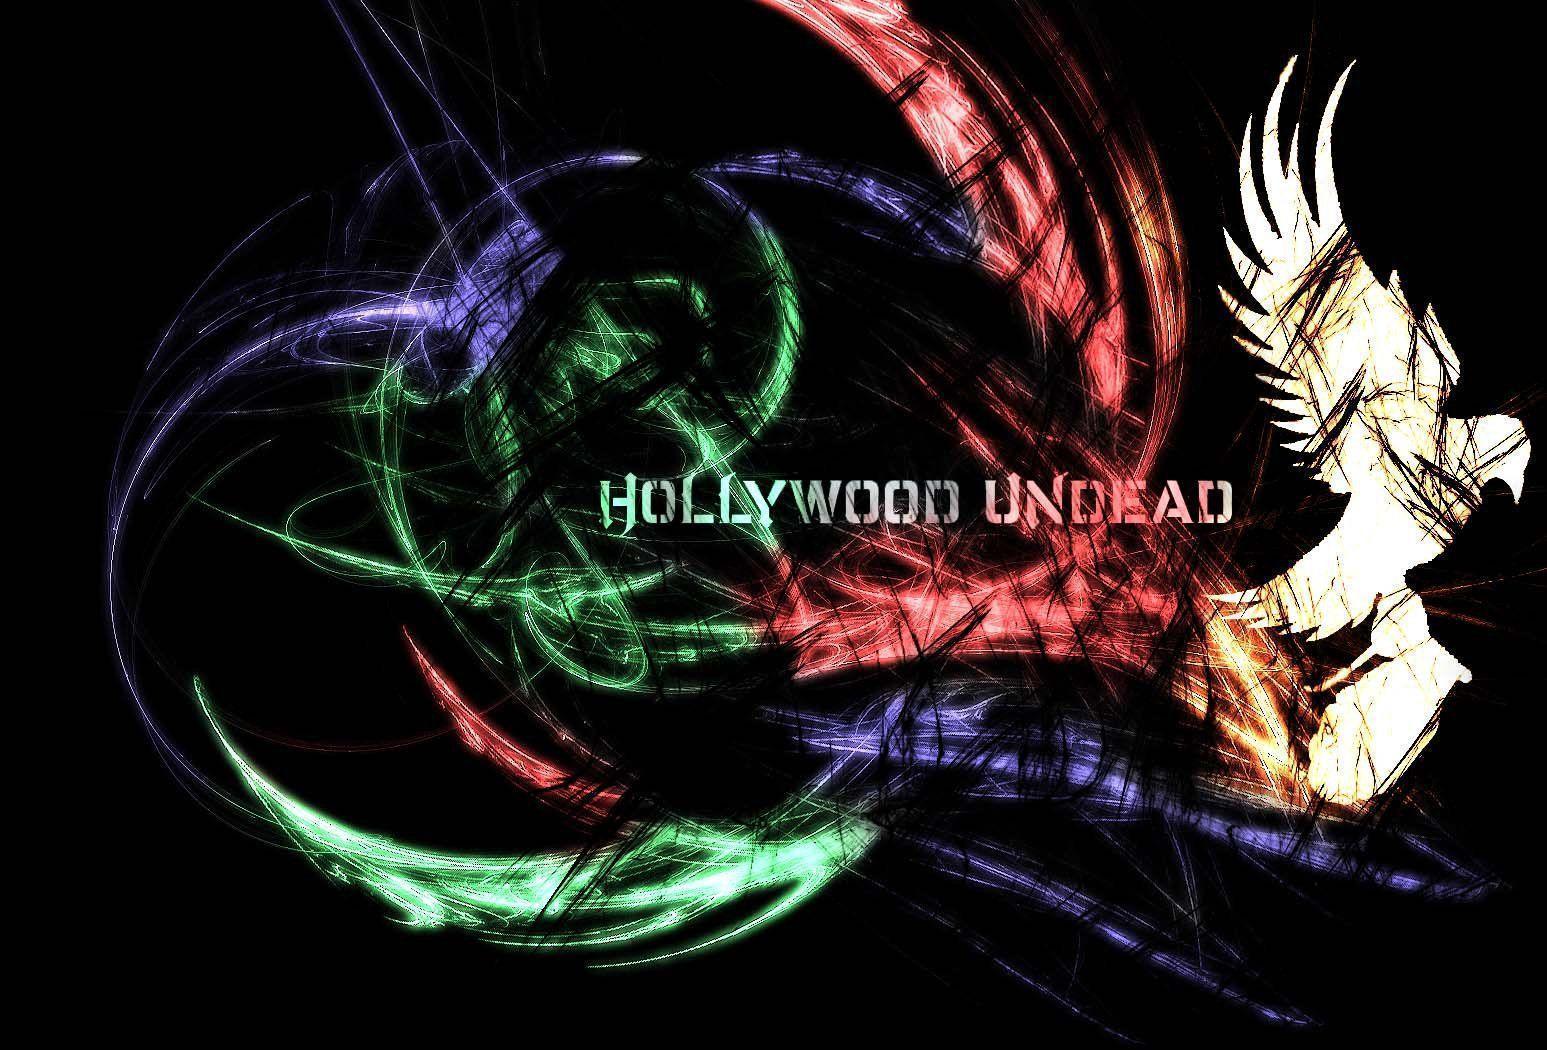 Nice Wallpaper Of Hollywood Undead, Picture Of Masks, Rapcore